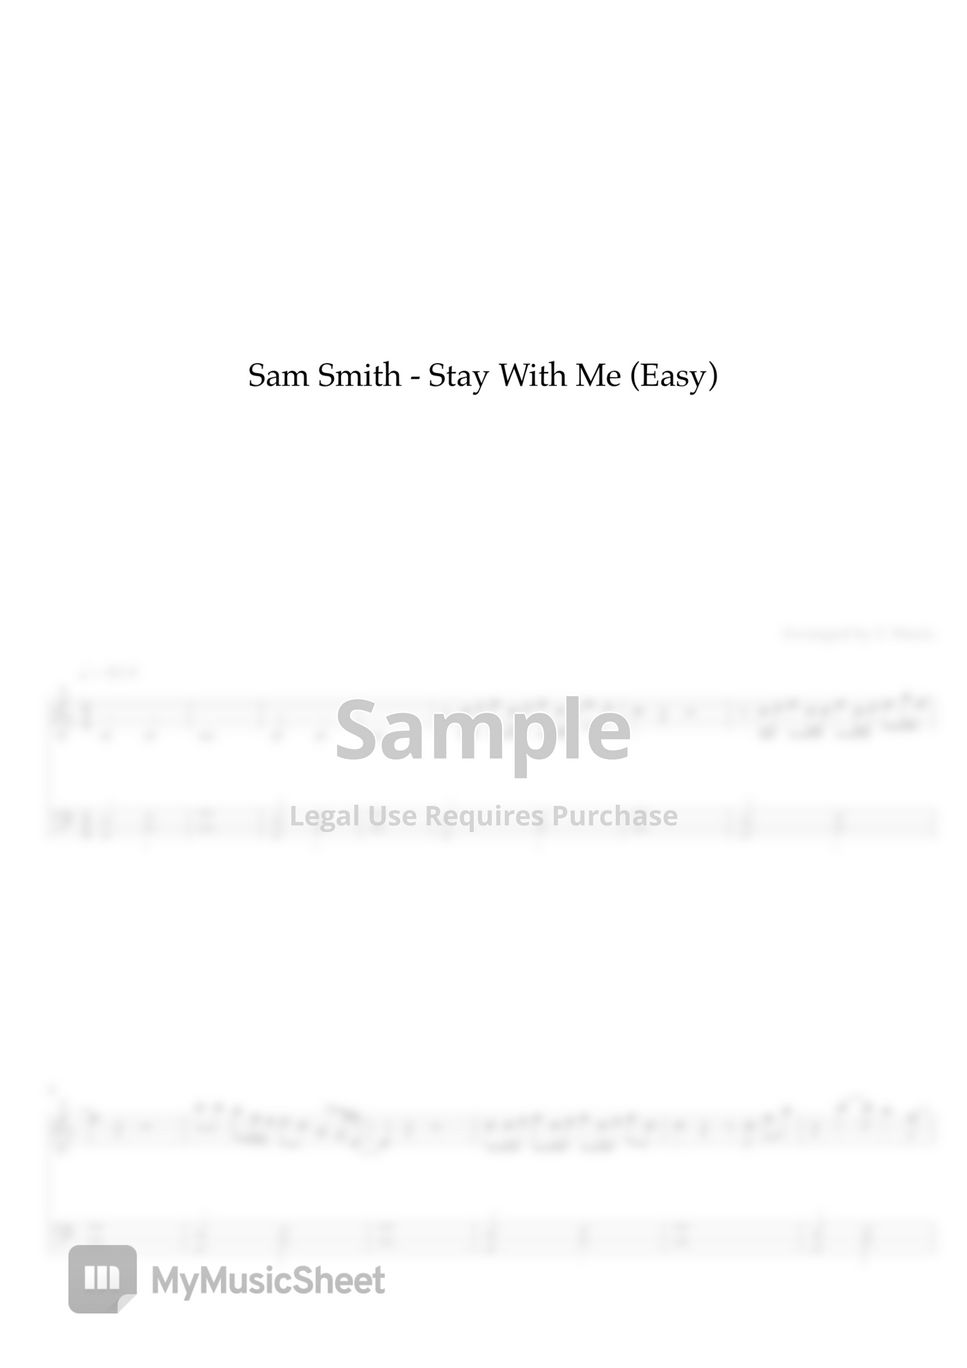 Sam Smith - Stay with Me (Easy Version) by C Music